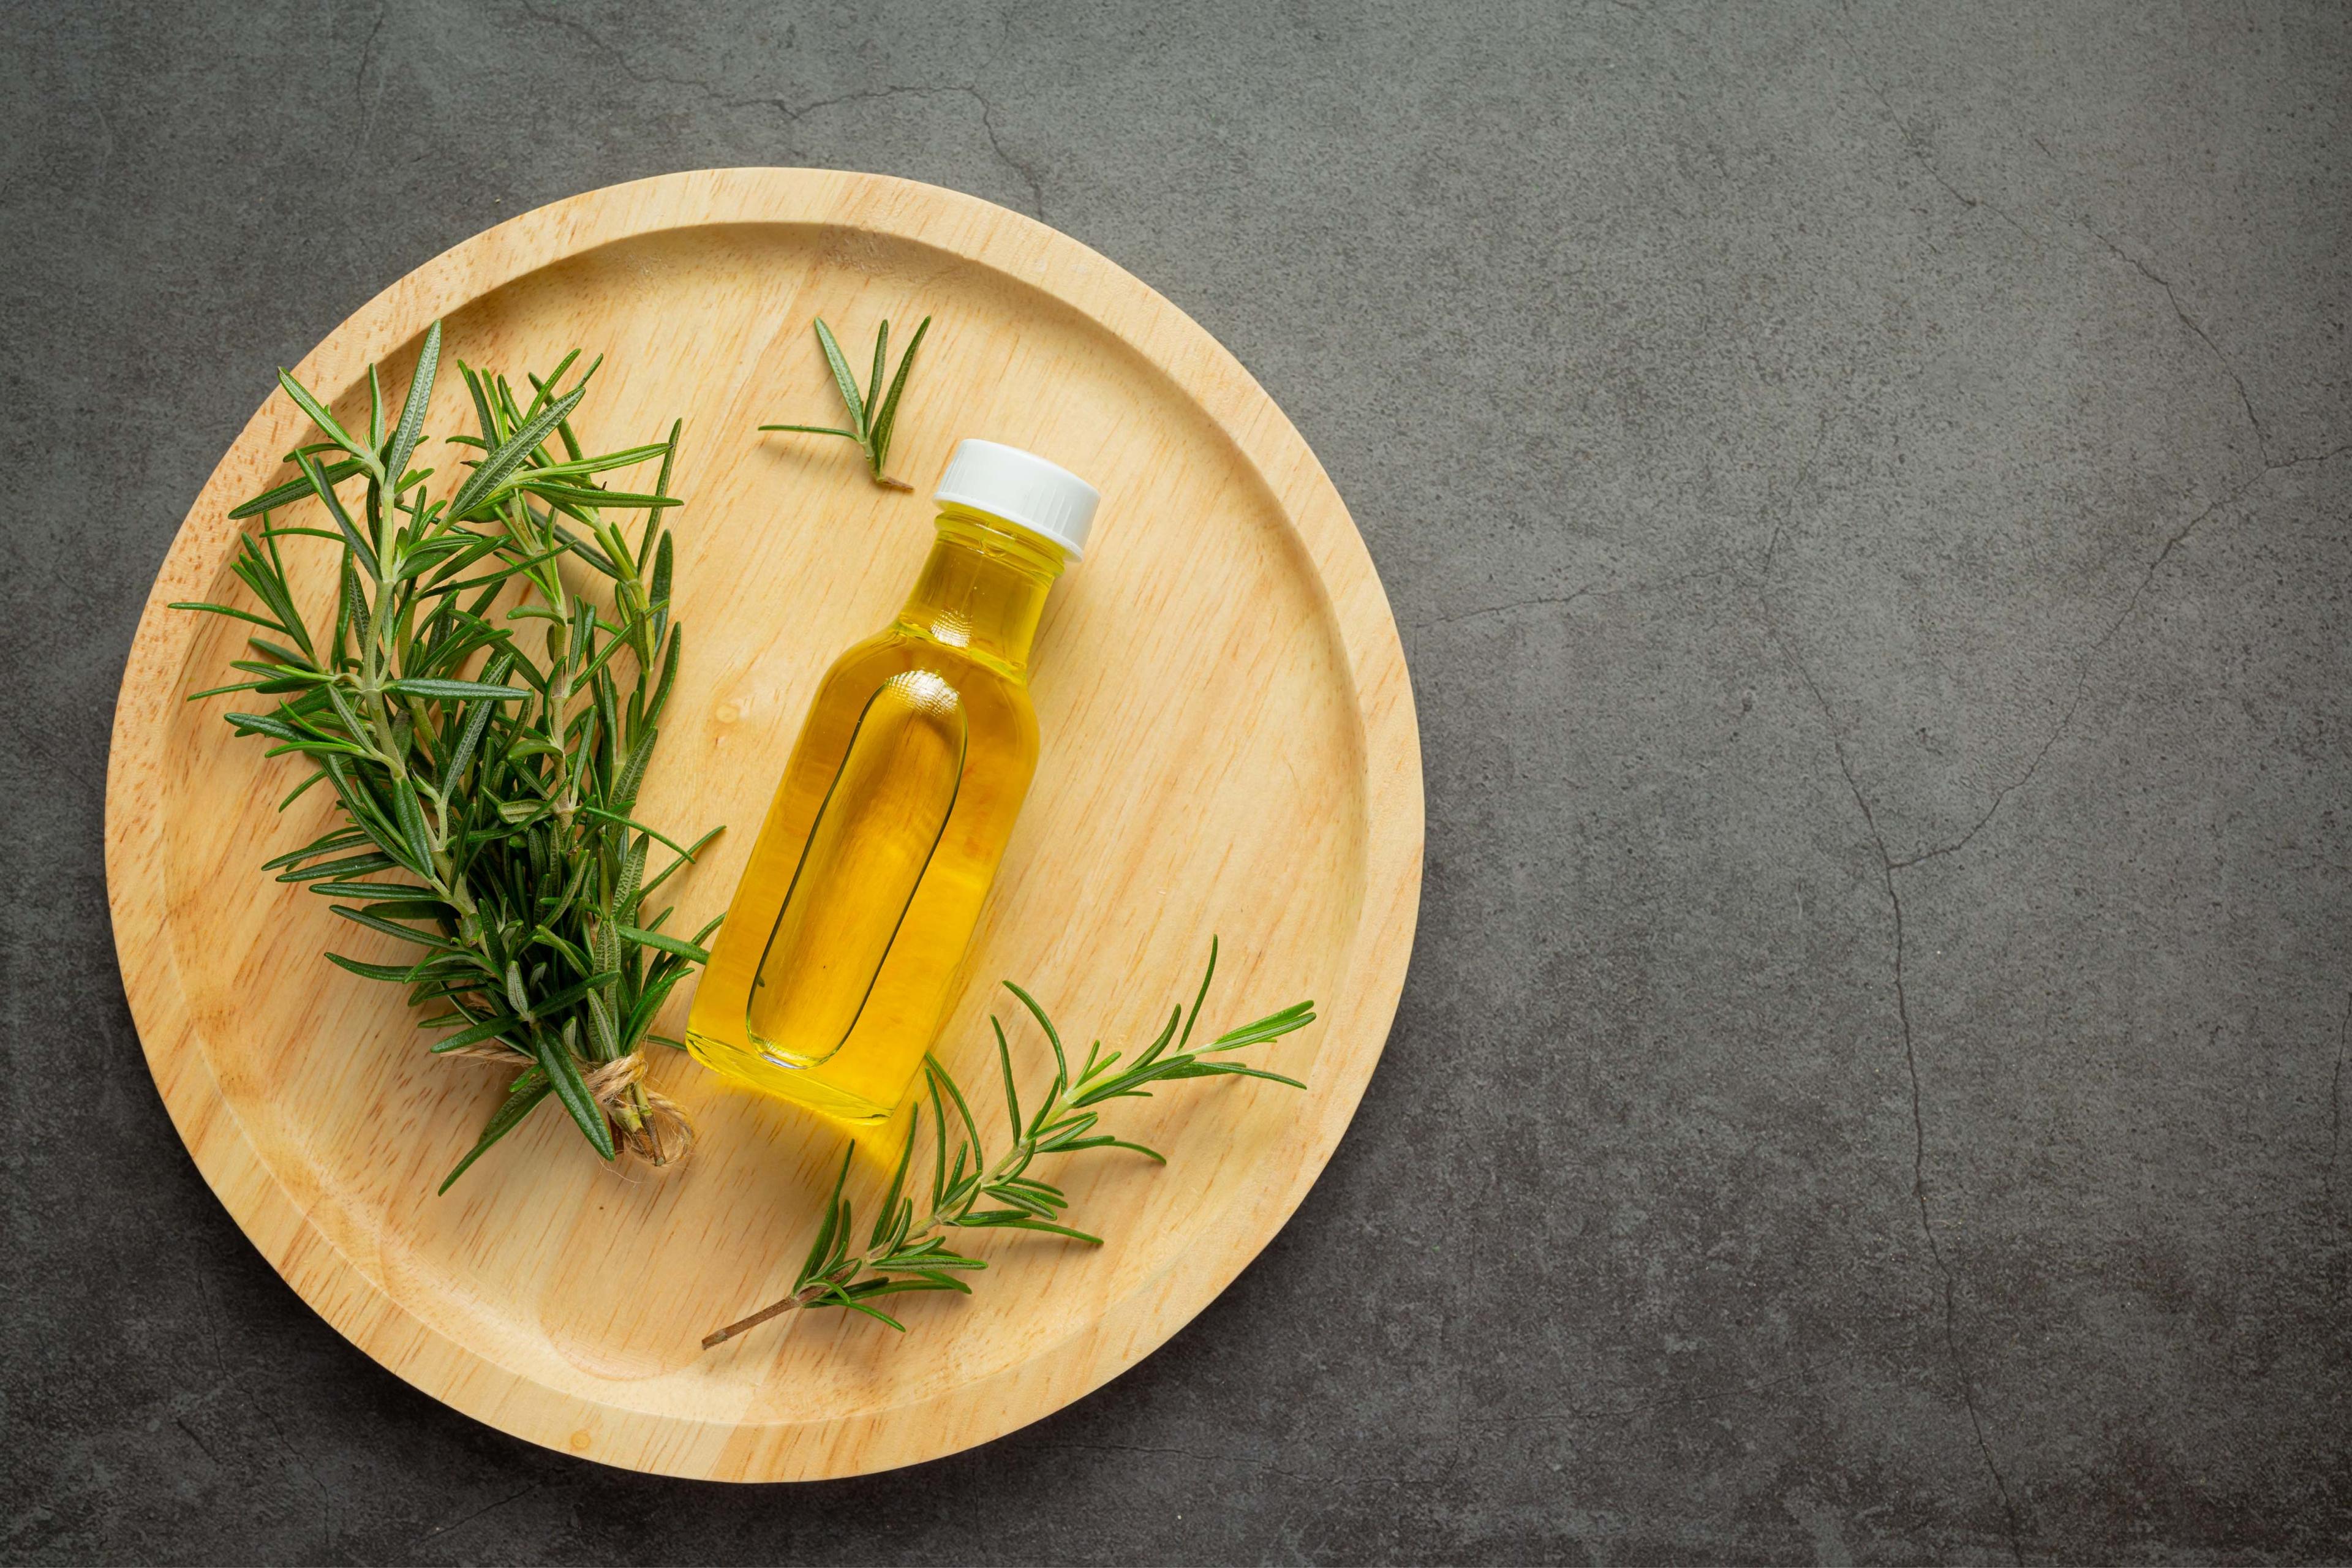 5 Rosemary Oil Benefits For Health, Uses and Tips